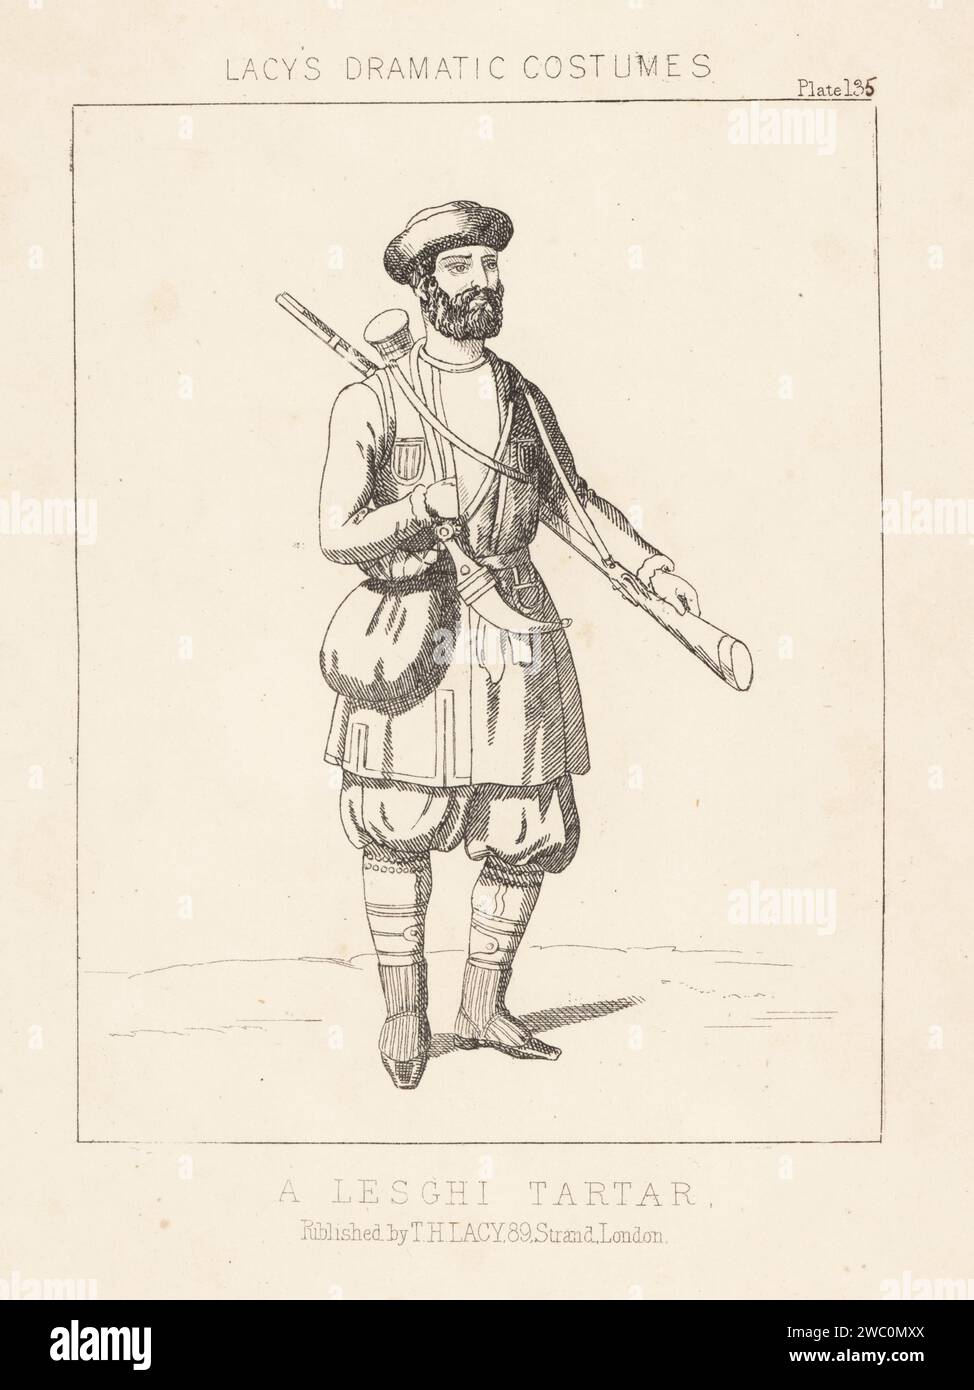 Costume of a Lezgin or Lek, a Northeast Caucasian ethnic group native predominantly to Dagestan. In cap, tunic, breeches, gaiters, with musket, dagger and hunting horn. A Lesghi Tartar. Lithograph from Thomas Hailes Lacy's Male Costumes, Historical, National and Dramatic in 200 Plates, London, 1865. Lacy (1809-1873) was a British actor, playwright, theatrical manager and publisher. Stock Photo